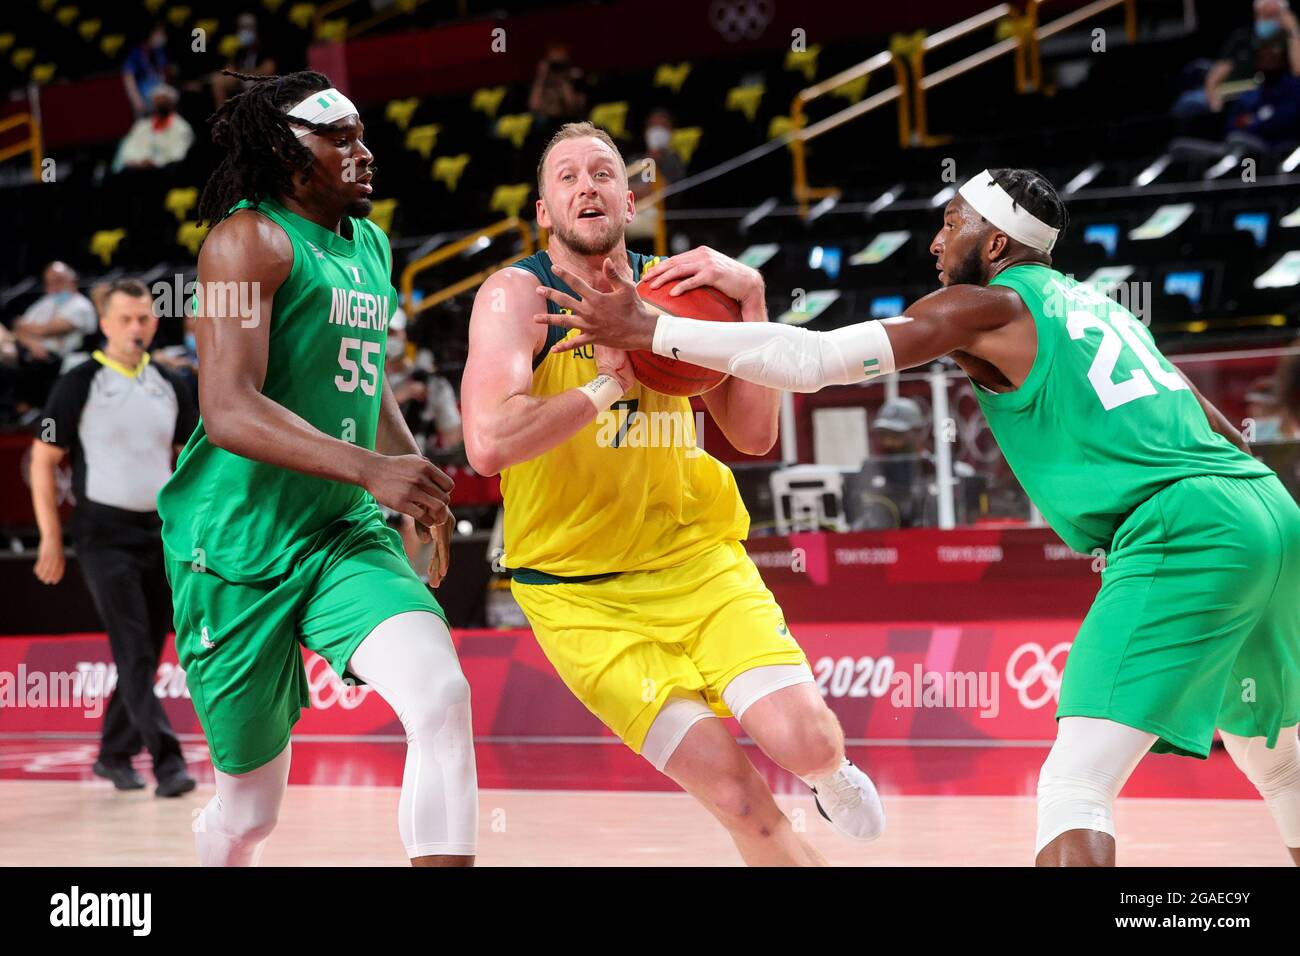 Tokyo, Japan, 25 July, 2021. Dante Exum of Team Australia dribbles the ball  during the Men's Basketball preliminary Round Group B - Match 3 between  Australia and Nigeria on Day 2 of